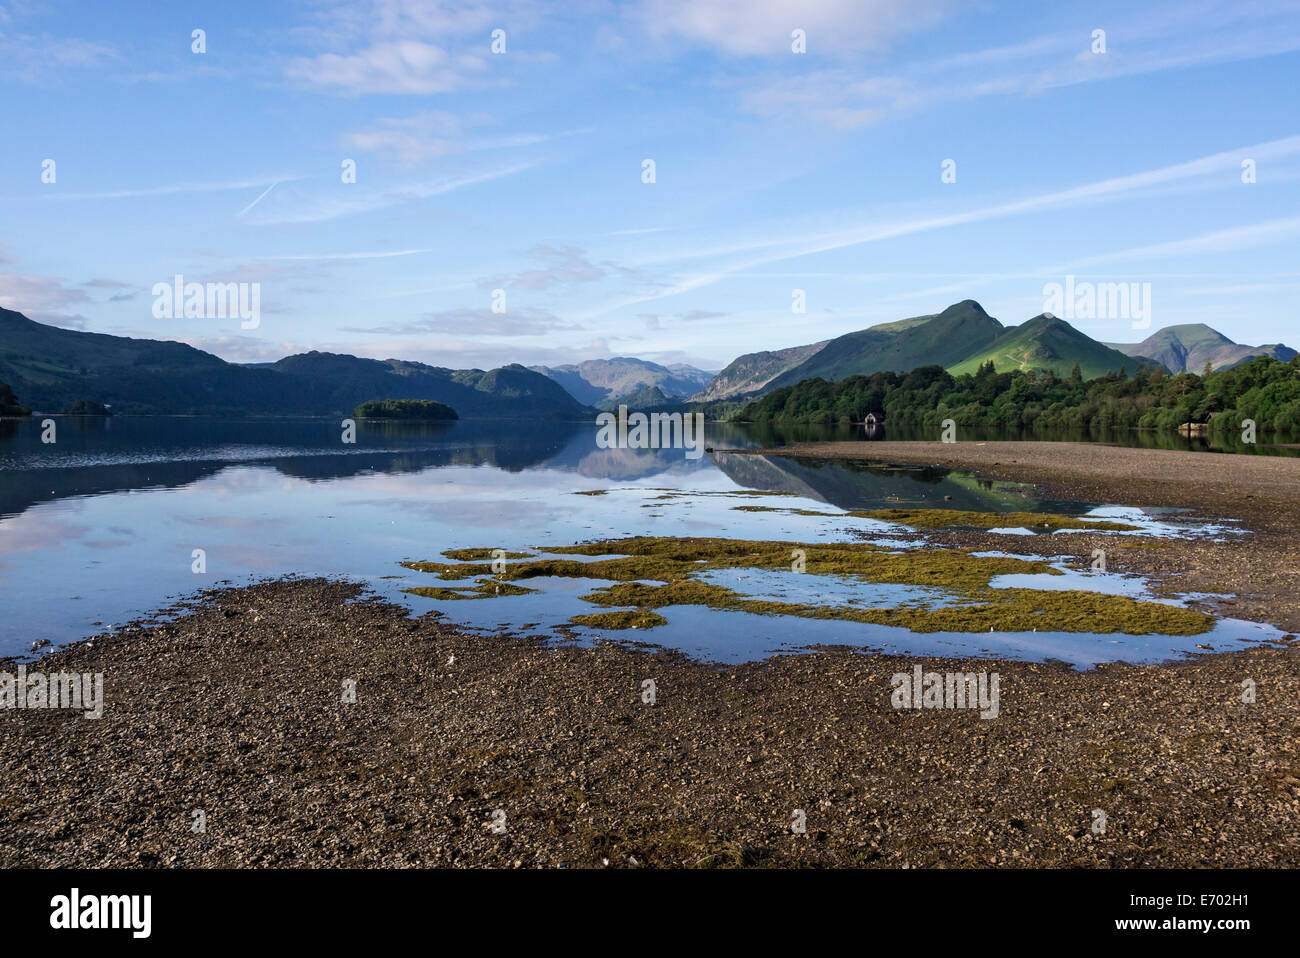 Derwentwater, Lake District, Cumbria. The picture shows the slit deposit at the north end of the lake after repeated floods. Stock Photo